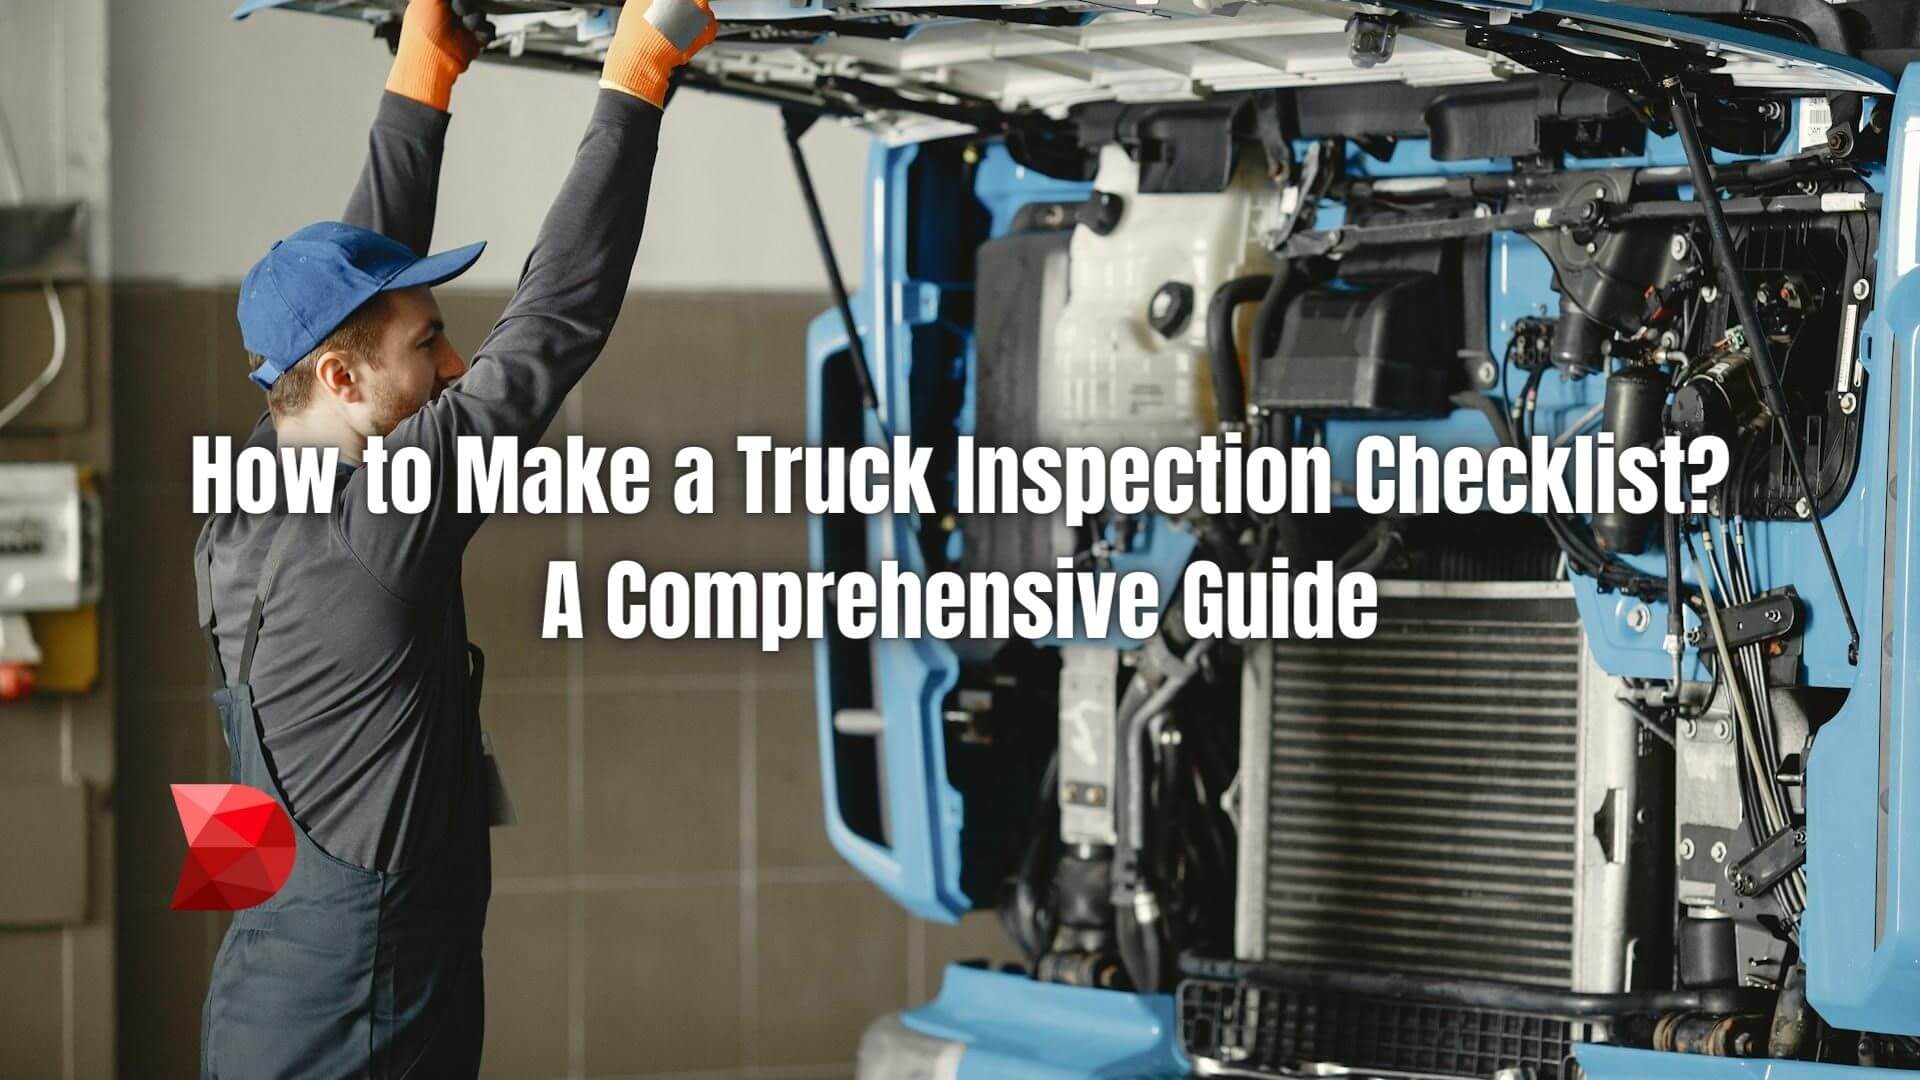 Ensure safety and compliance effortlessly! Discover the essential steps in crafting a full truck inspection checklist with our expert guide.